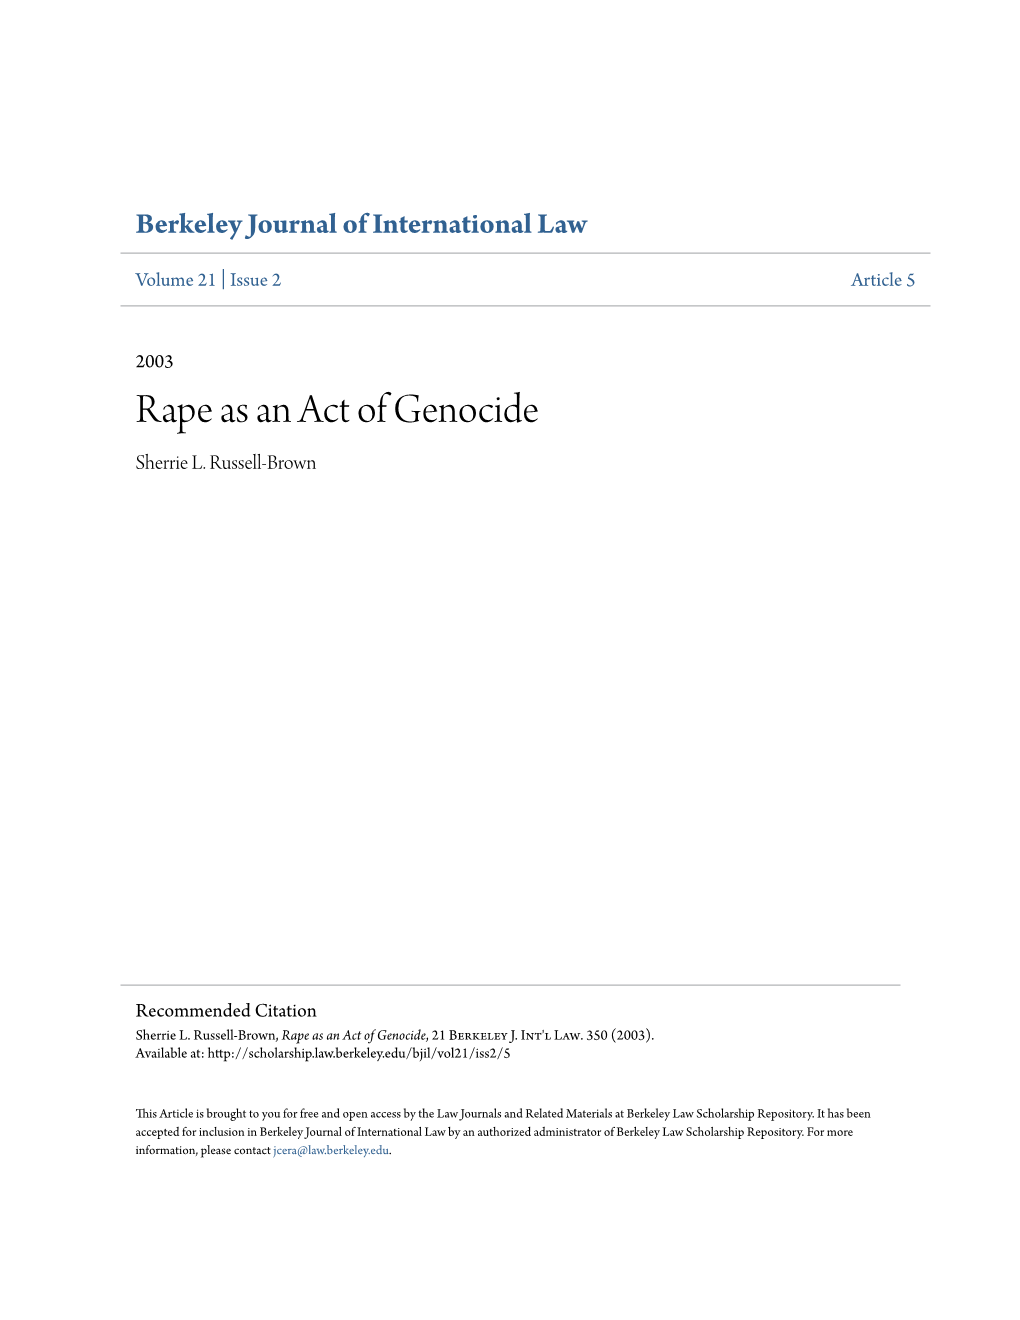 Rape As an Act of Genocide Sherrie L